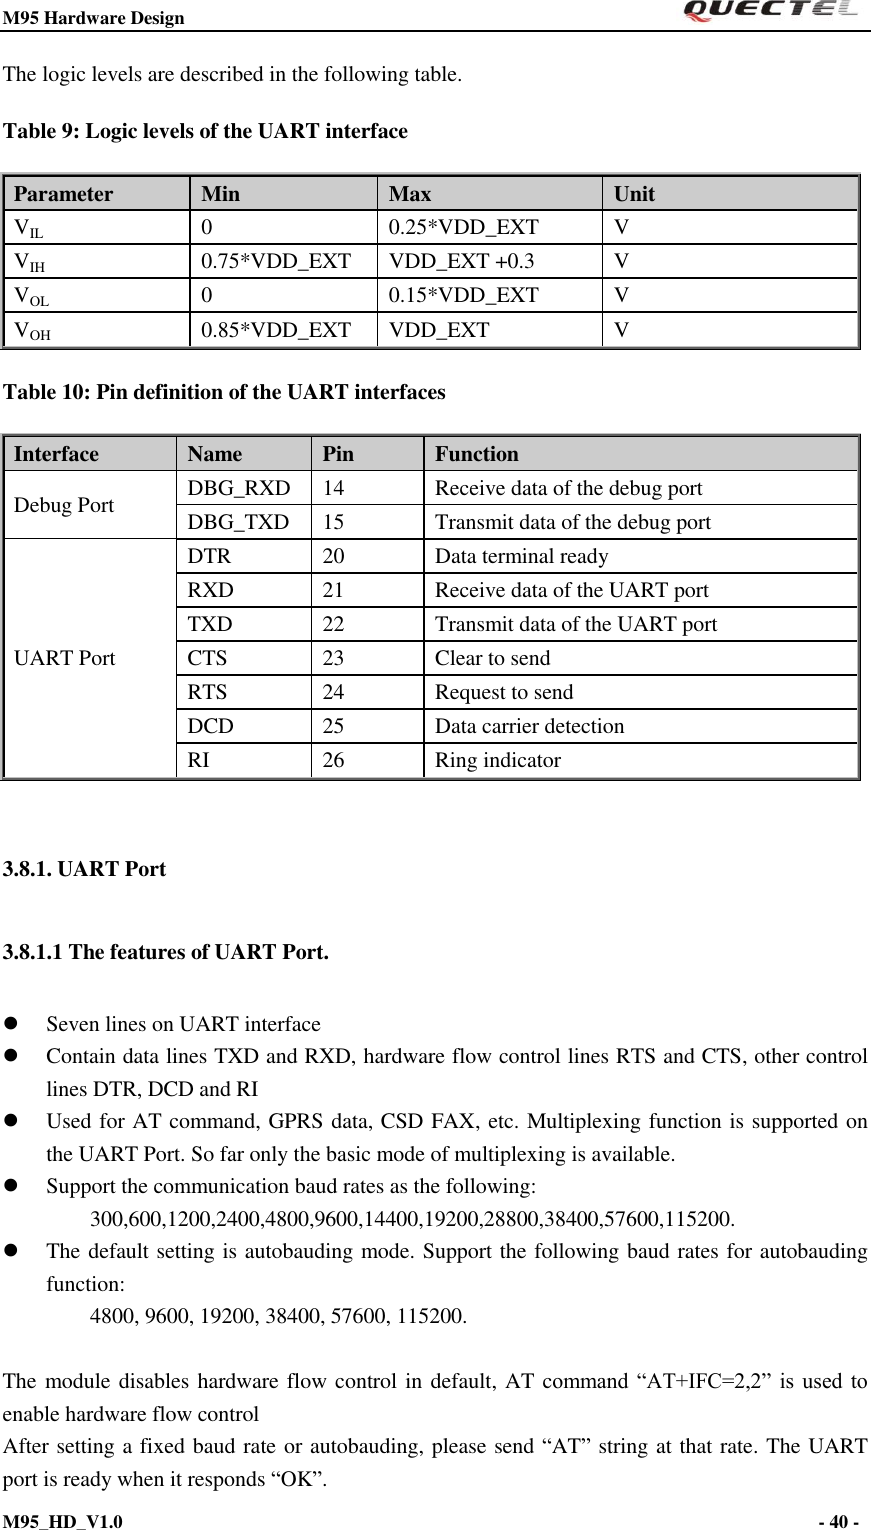 M95 Hardware Design                                                       M95_HD_V1.0                                                                - 40 -    The logic levels are described in the following table. Table 9: Logic levels of the UART interface Parameter Min Max   Unit VIL 0 0.25*VDD_EXT V VIH 0.75*VDD_EXT VDD_EXT +0.3 V VOL 0 0.15*VDD_EXT V VOH 0.85*VDD_EXT VDD_EXT V Table 10: Pin definition of the UART interfaces Interface Name Pin Function Debug Port DBG_RXD 14 Receive data of the debug port DBG_TXD 15 Transmit data of the debug port UART Port DTR 20 Data terminal ready RXD 21 Receive data of the UART port TXD 22 Transmit data of the UART port CTS 23 Clear to send RTS 24 Request to send DCD 25 Data carrier detection RI 26 Ring indicator  3.8.1. UART Port 3.8.1.1 The features of UART Port.  Seven lines on UART interface  Contain data lines TXD and RXD, hardware flow control lines RTS and CTS, other control lines DTR, DCD and RI  Used for AT command, GPRS data, CSD FAX, etc. Multiplexing function is supported on the UART Port. So far only the basic mode of multiplexing is available.  Support the communication baud rates as the following:     300,600,1200,2400,4800,9600,14400,19200,28800,38400,57600,115200.    The default setting is autobauding mode. Support the following baud rates for autobauding function:     4800, 9600, 19200, 38400, 57600, 115200.    The module disables hardware flow control in default, AT command  “AT+IFC=2,2” is  used  to enable hardware flow control After setting a fixed baud rate or autobauding, please send “AT” string at that rate. The UART port is ready when it responds “OK”.   